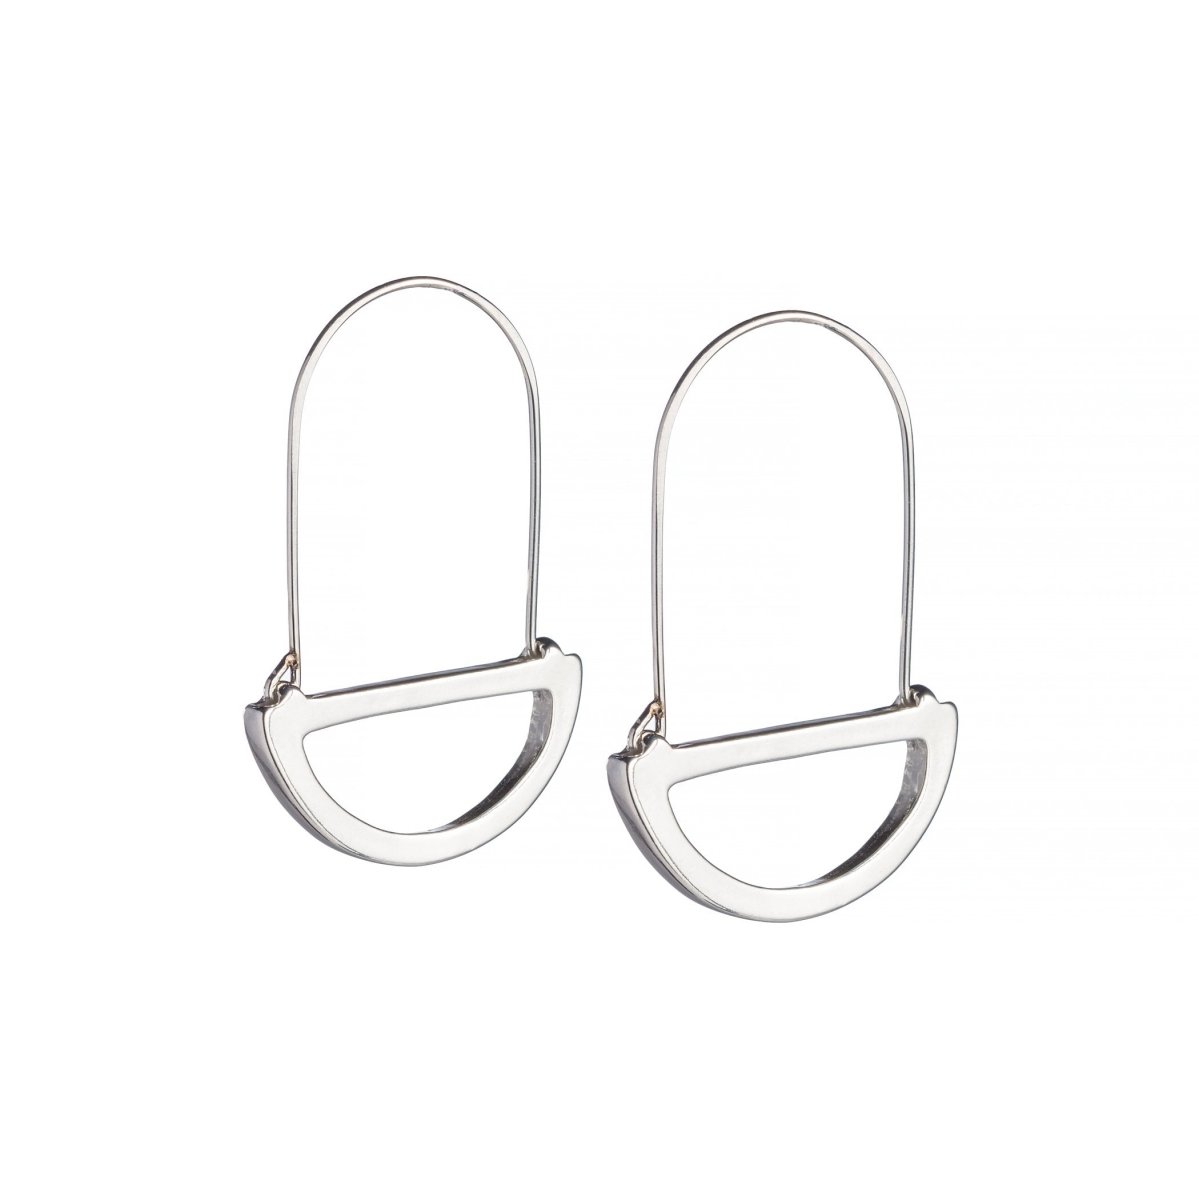 Modern, polished, cast silver semicircle pendants hanging below long, hand-formed, sterling silver hoops. Hand-crafted in Portland, Oregon.